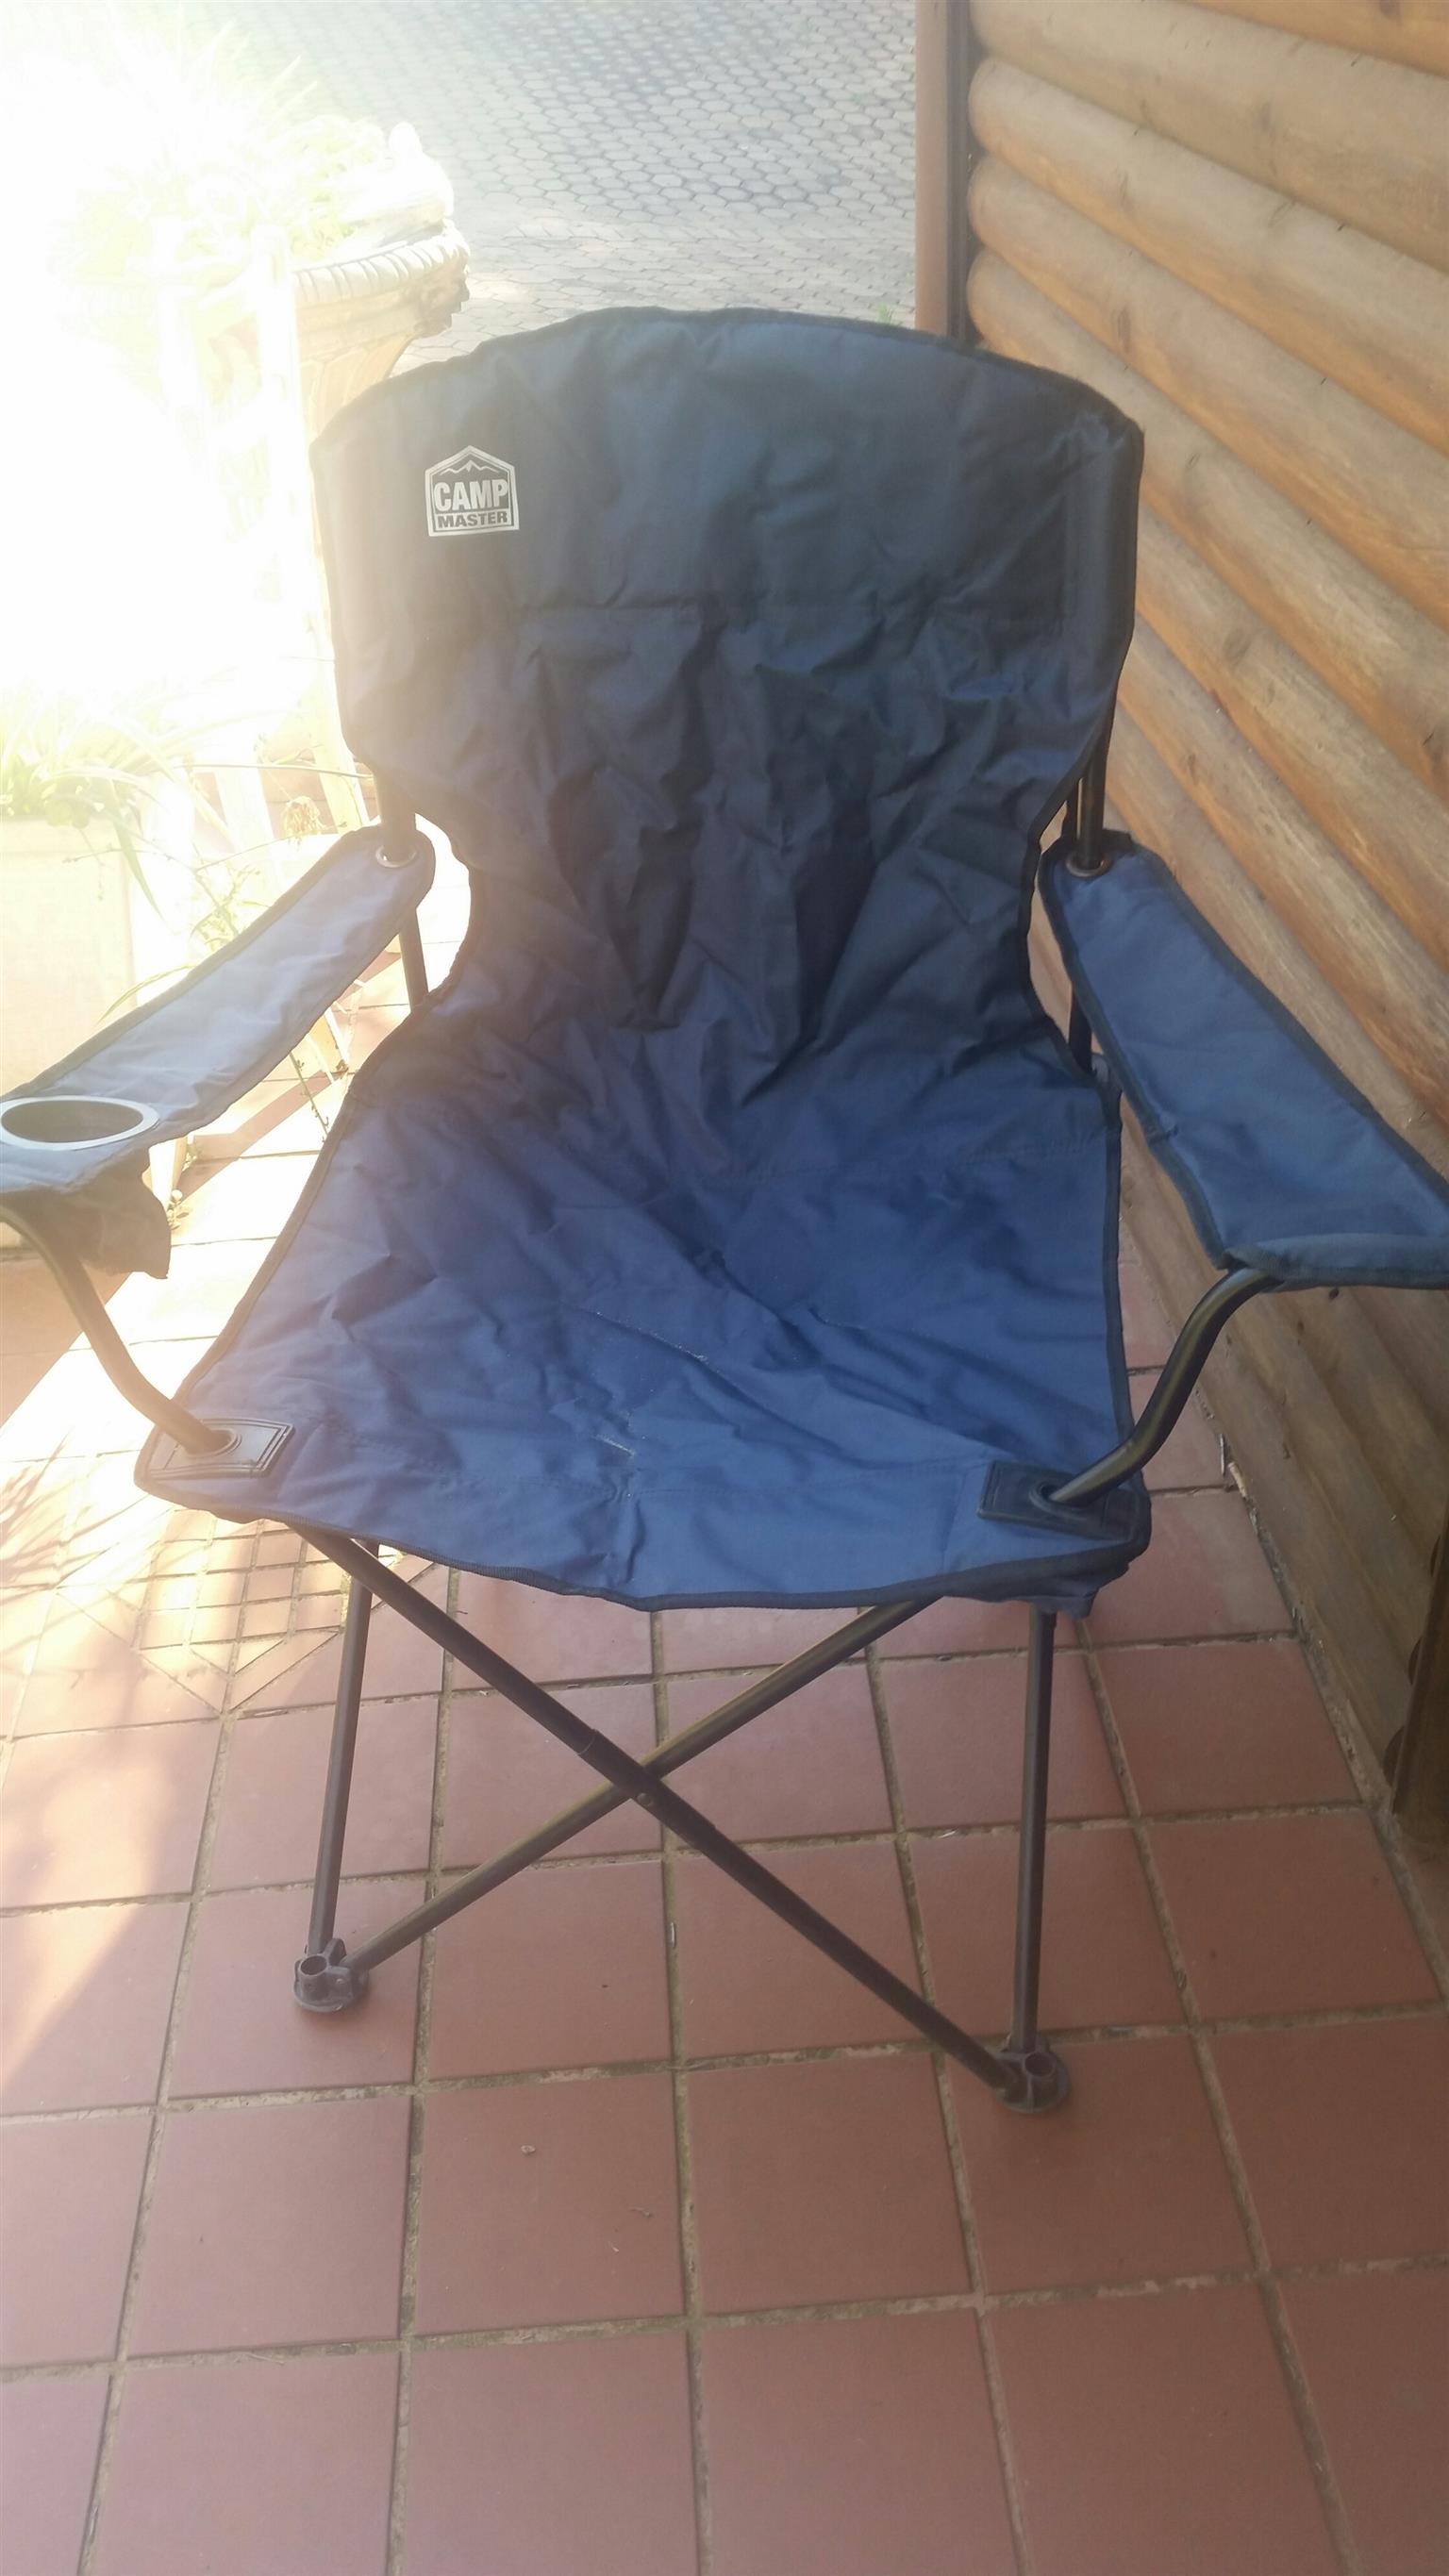 Camp Master foldable chair very new.